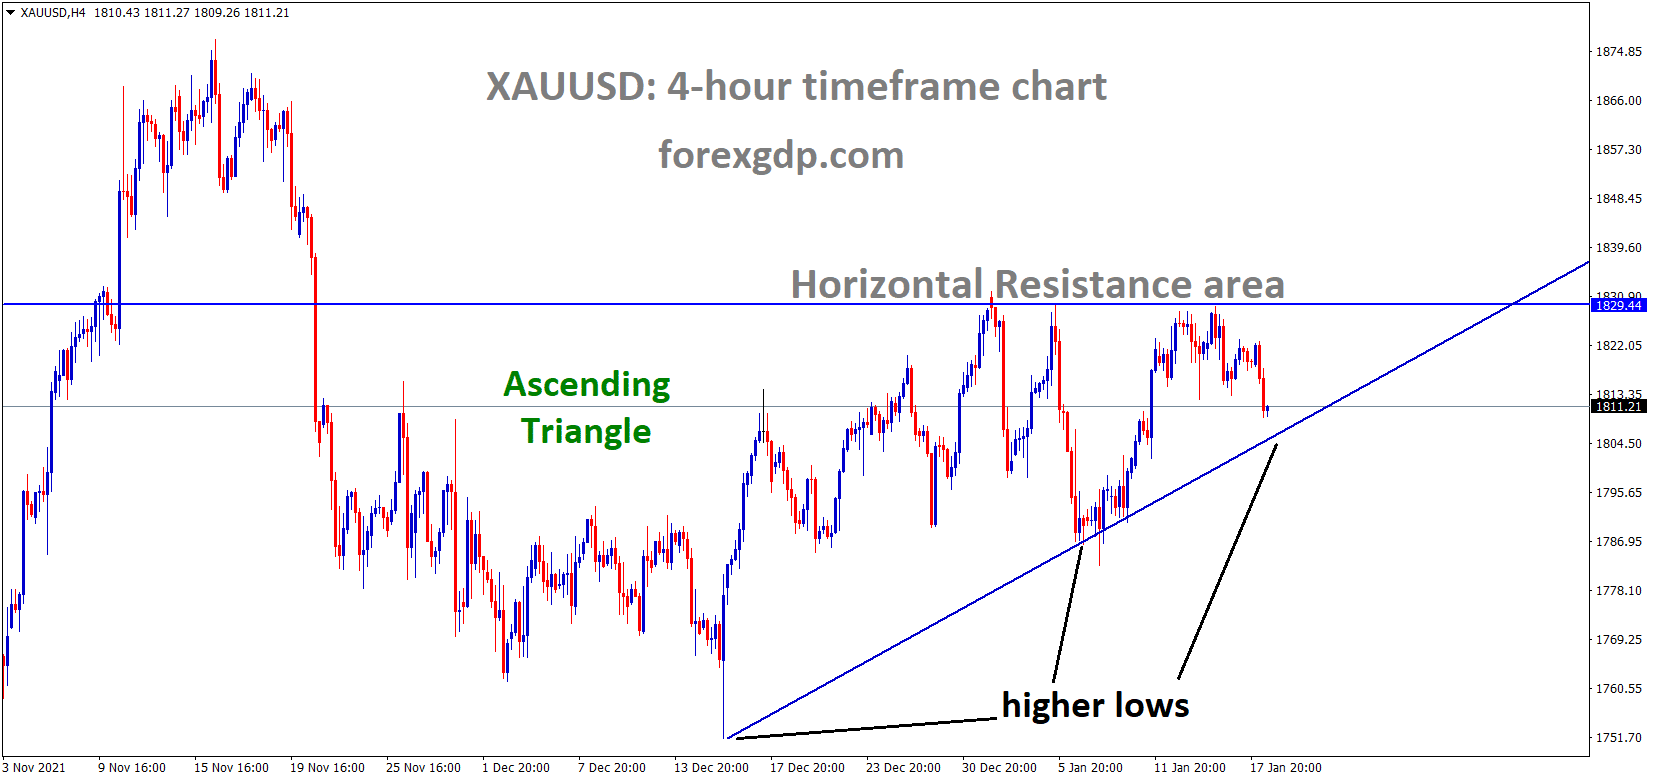 XAUUSD Gold price is moving in an ascending triangle pattern and the market has fallen from the Horizontal resistance area.